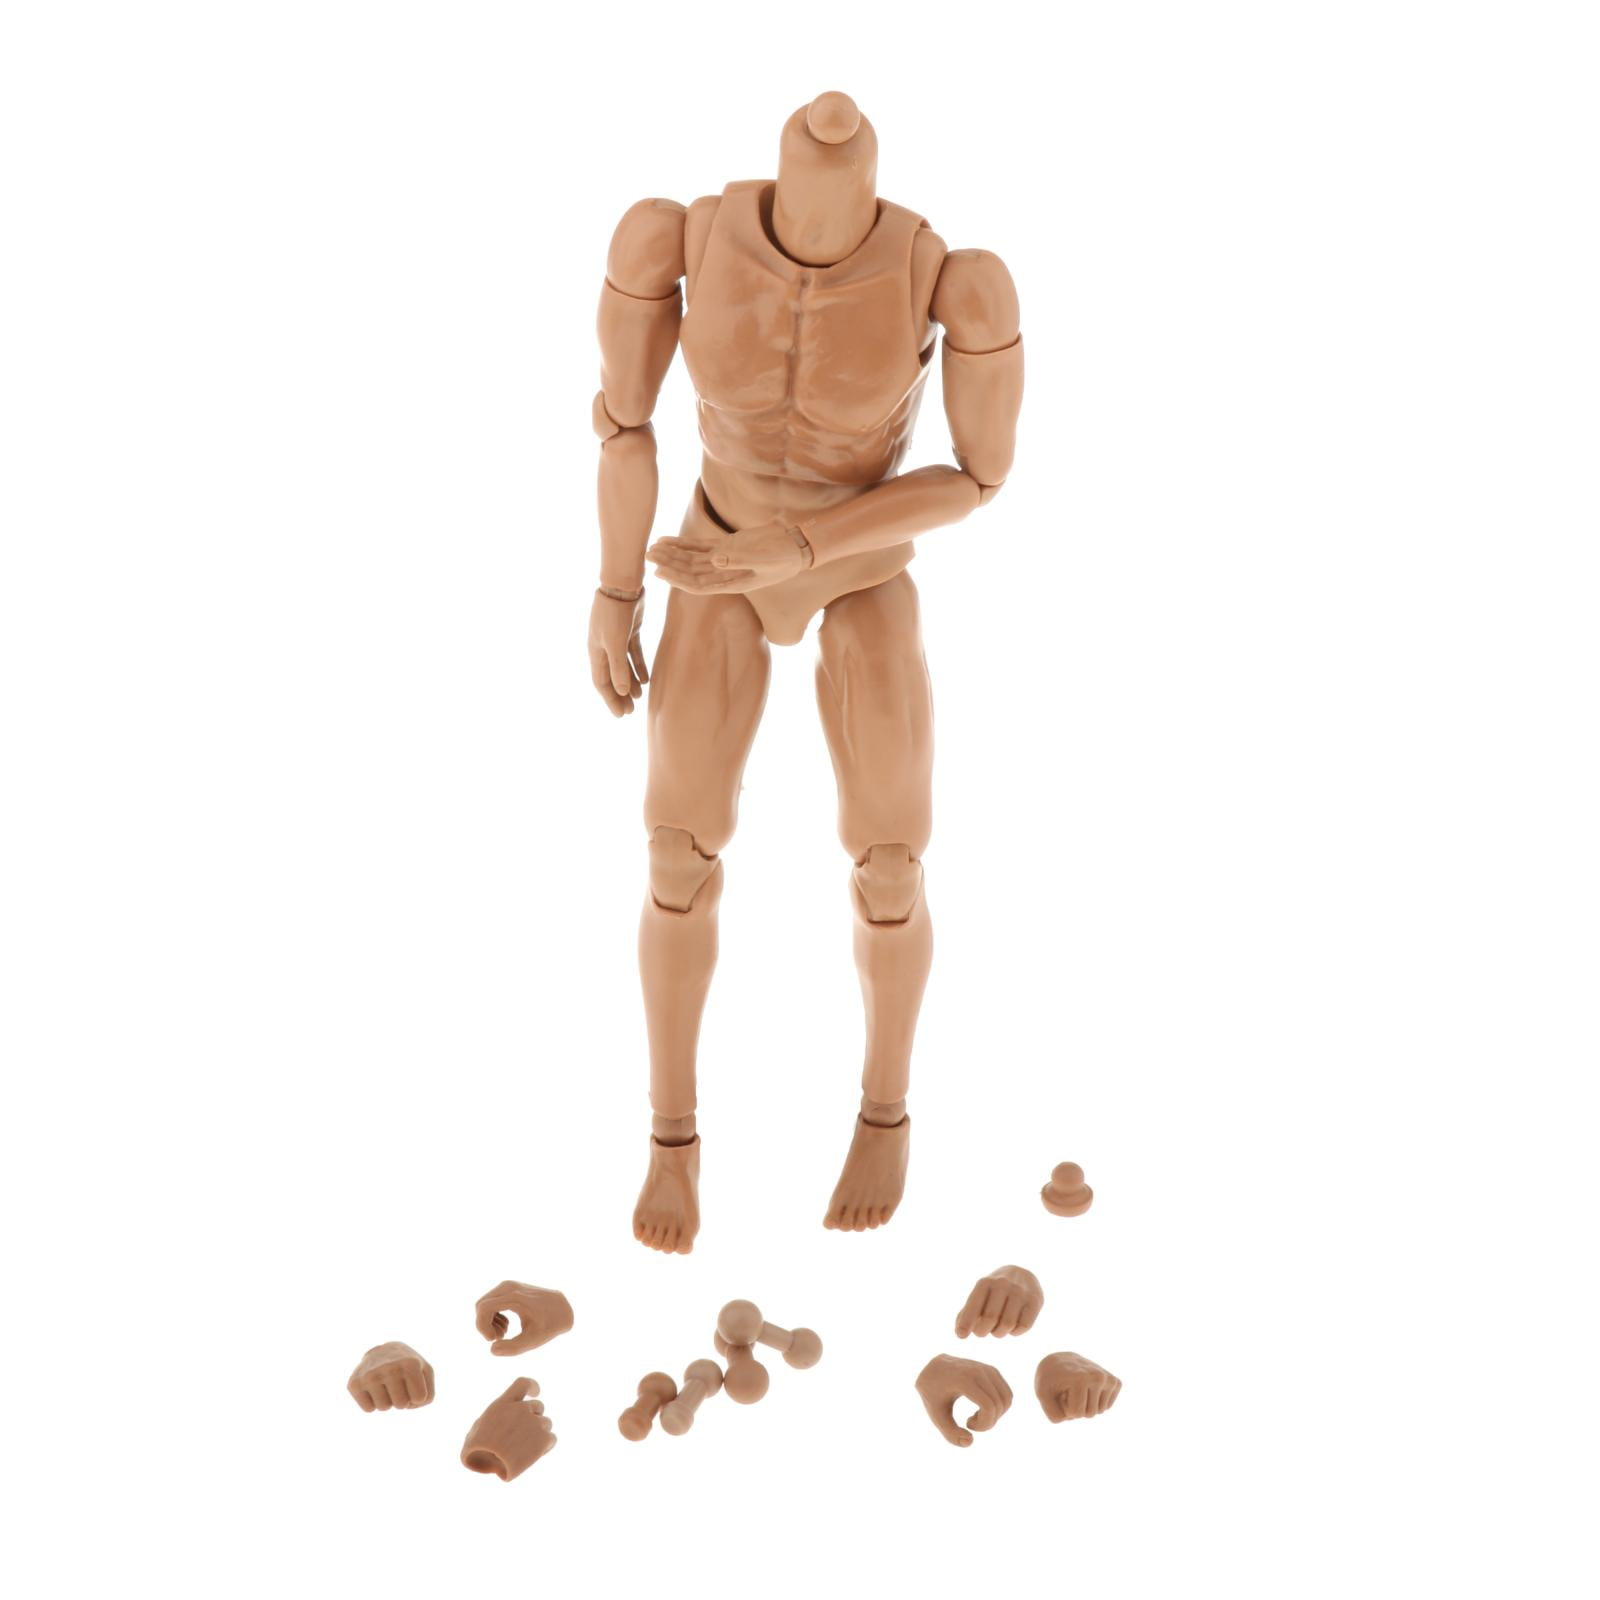 1:6 Scale Action Figure Model Nude Male Body 